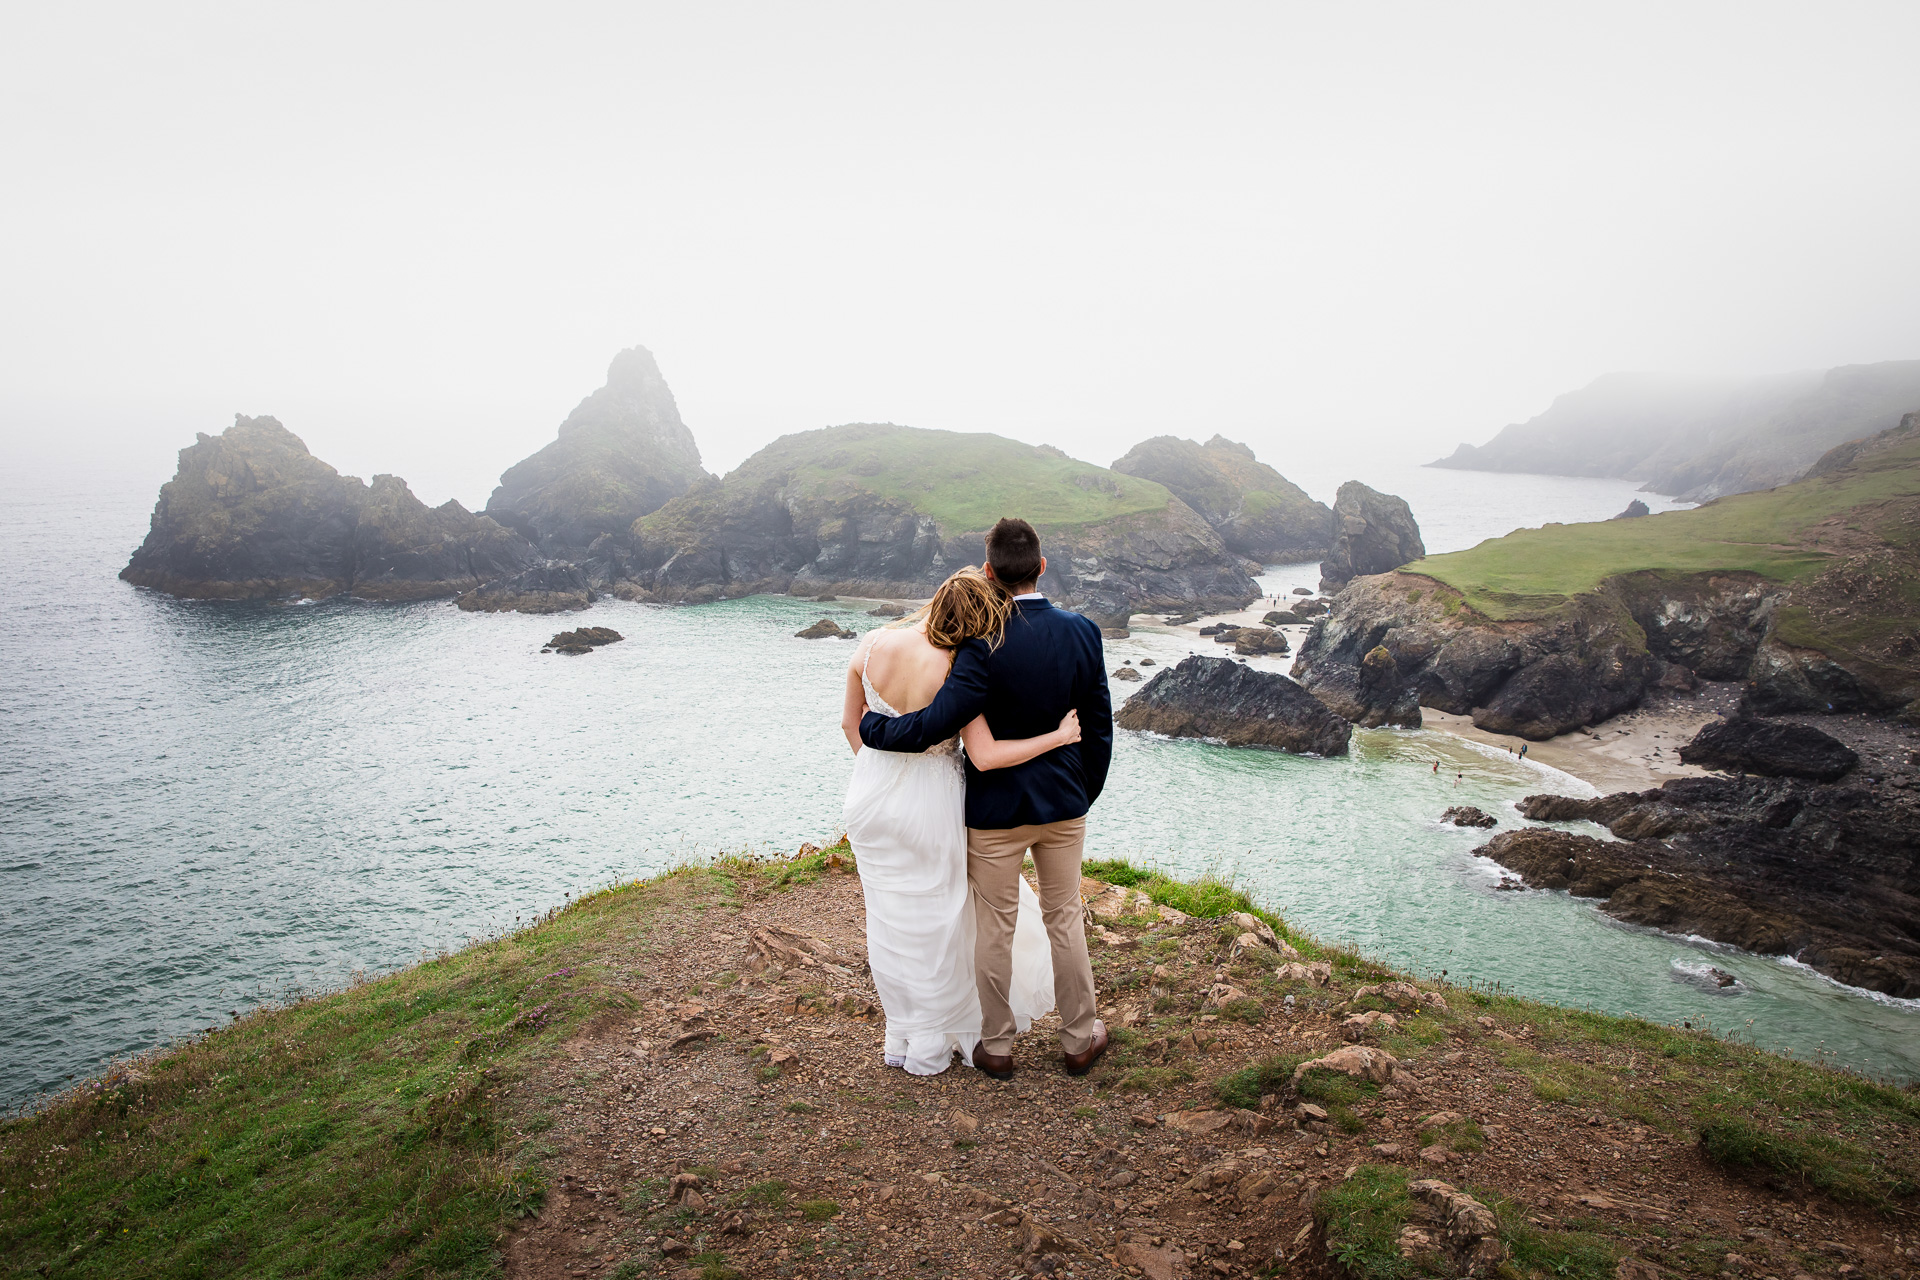 Wedding Elopement to the Stunning Kynance Cove on the Lizard in Cornwall. It even looks stunning surrounded by the sea mist